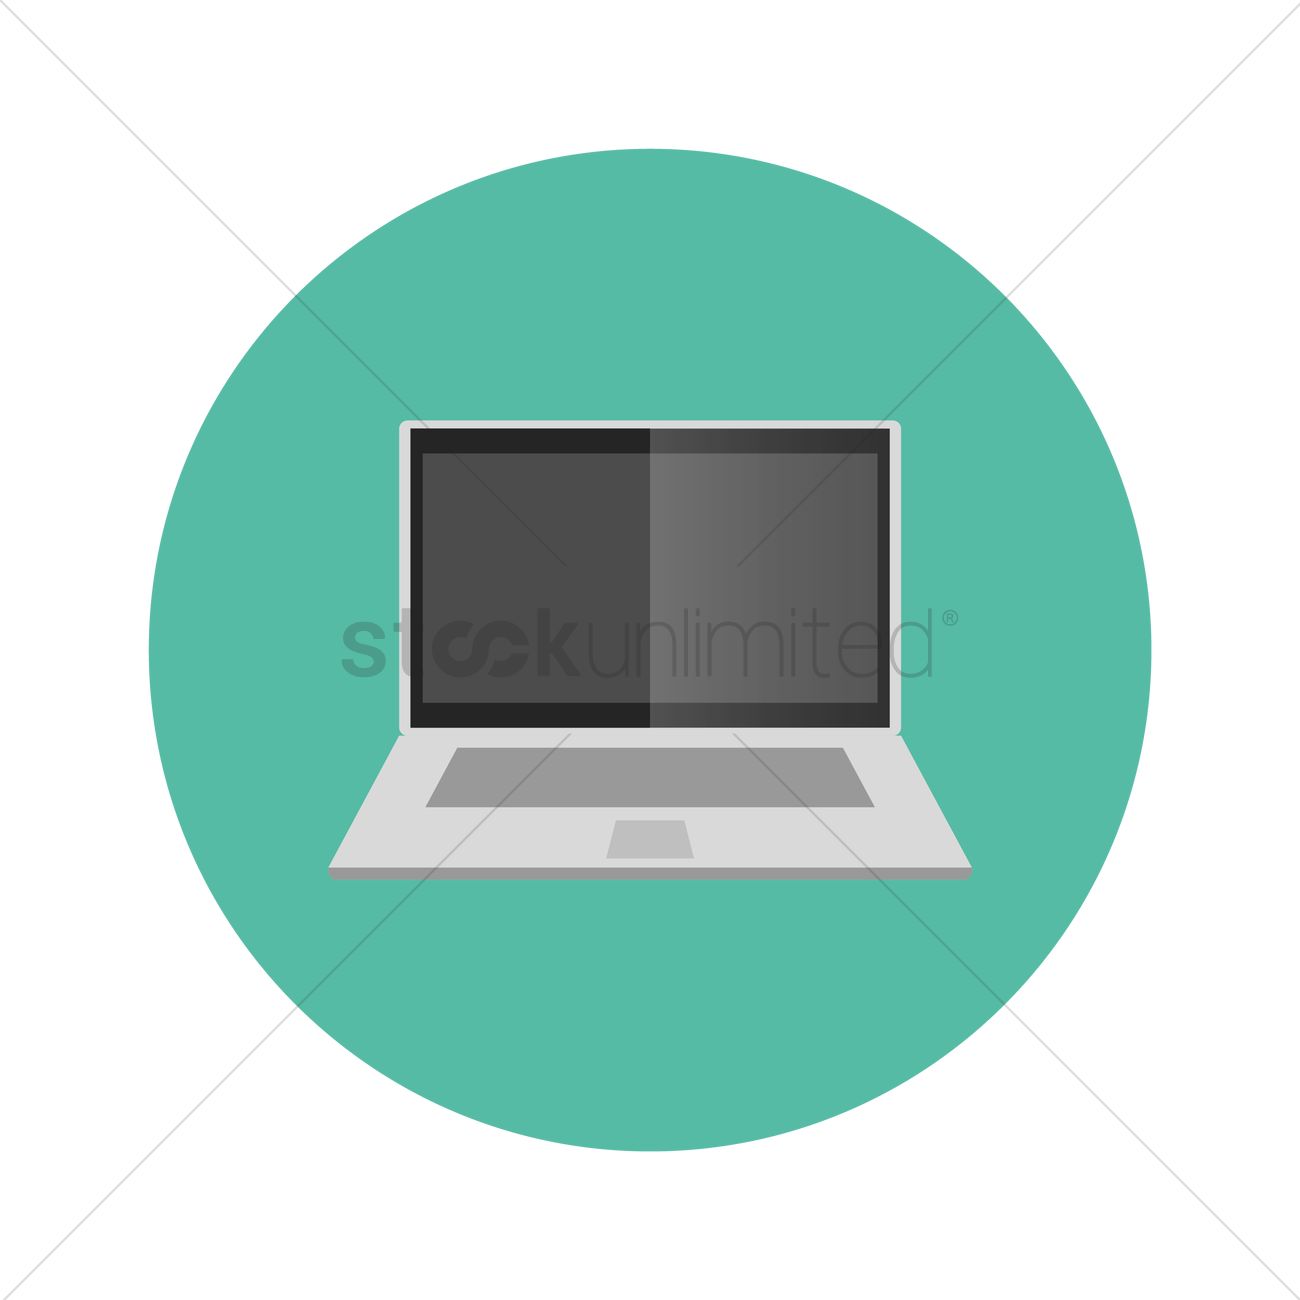 Laptop icon Vector Image - 1260190 | StockUnlimited